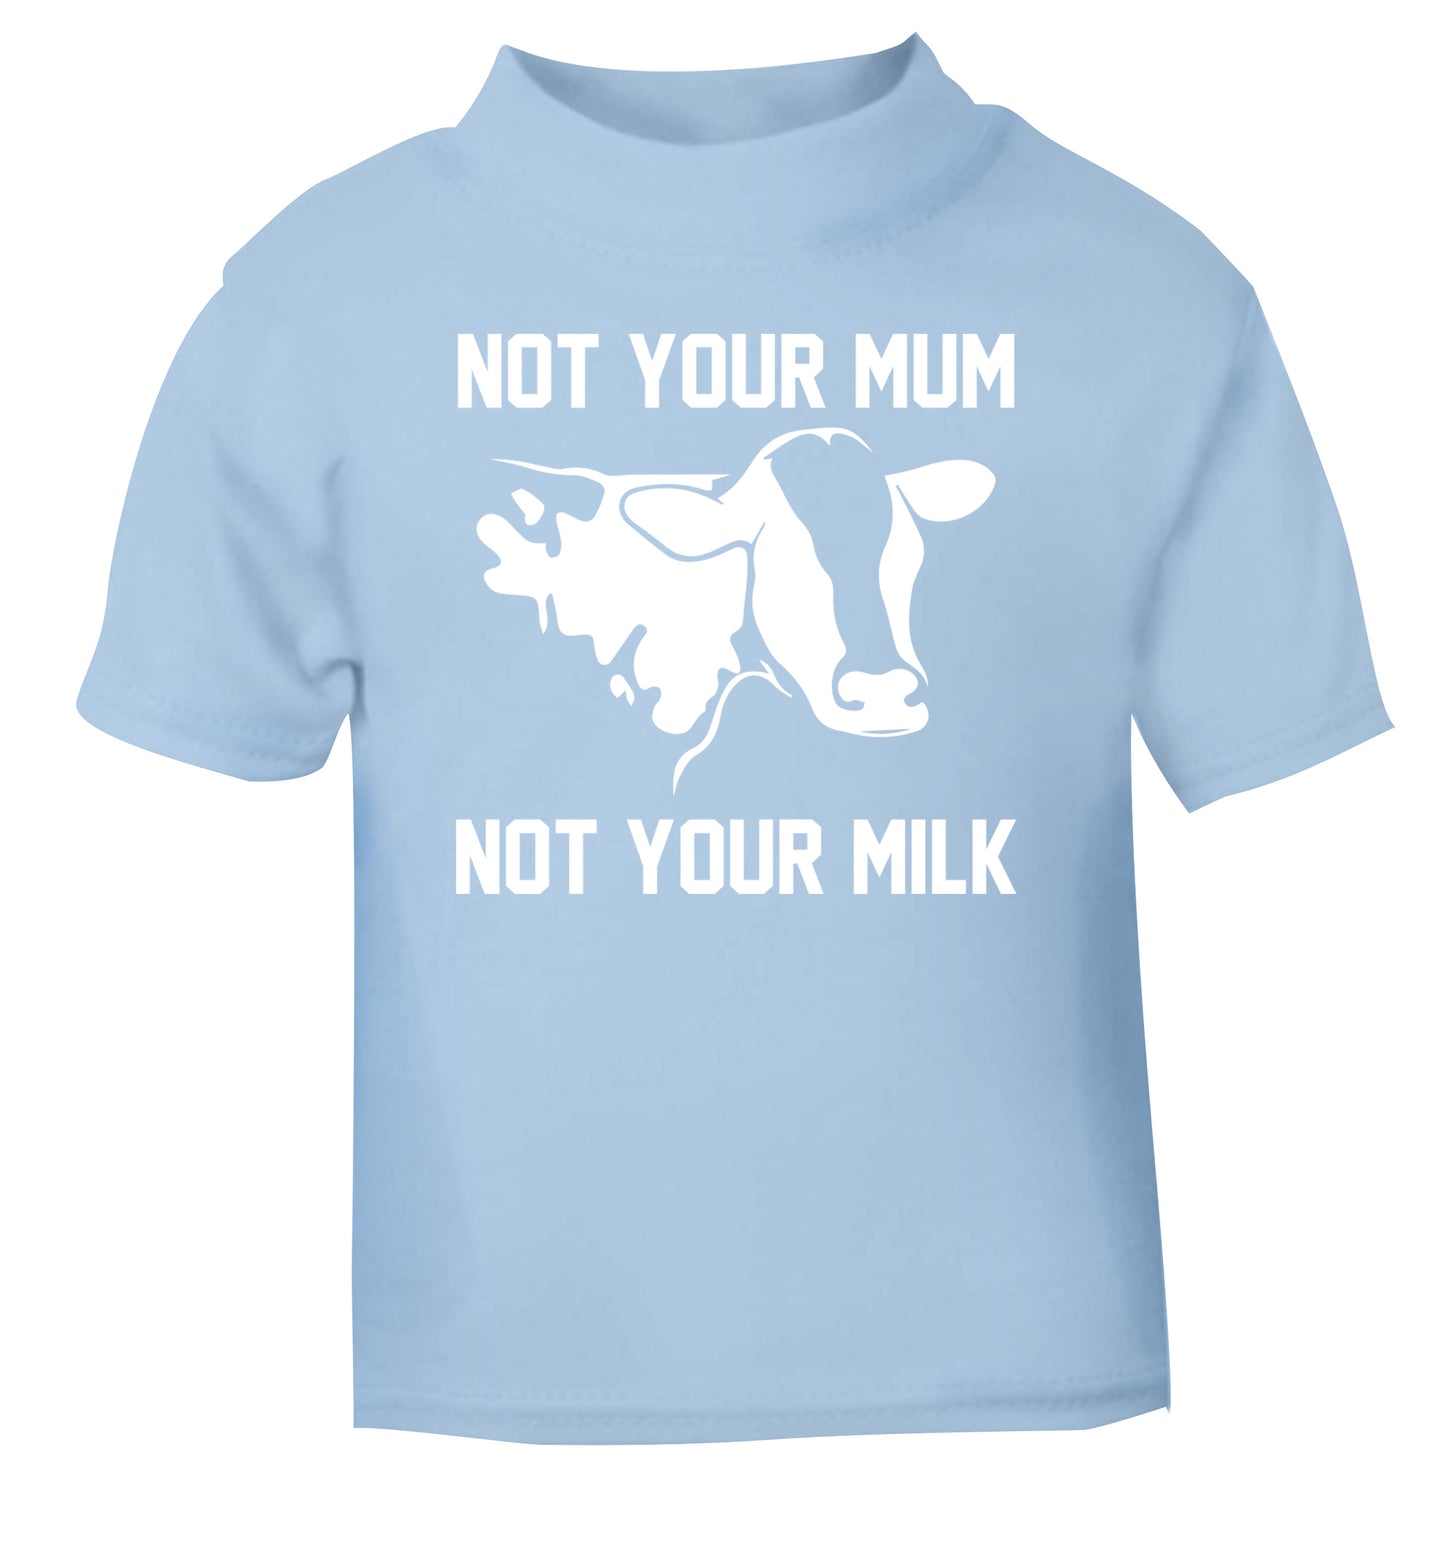 Not your mum not your milk light blue Baby Toddler Tshirt 2 Years